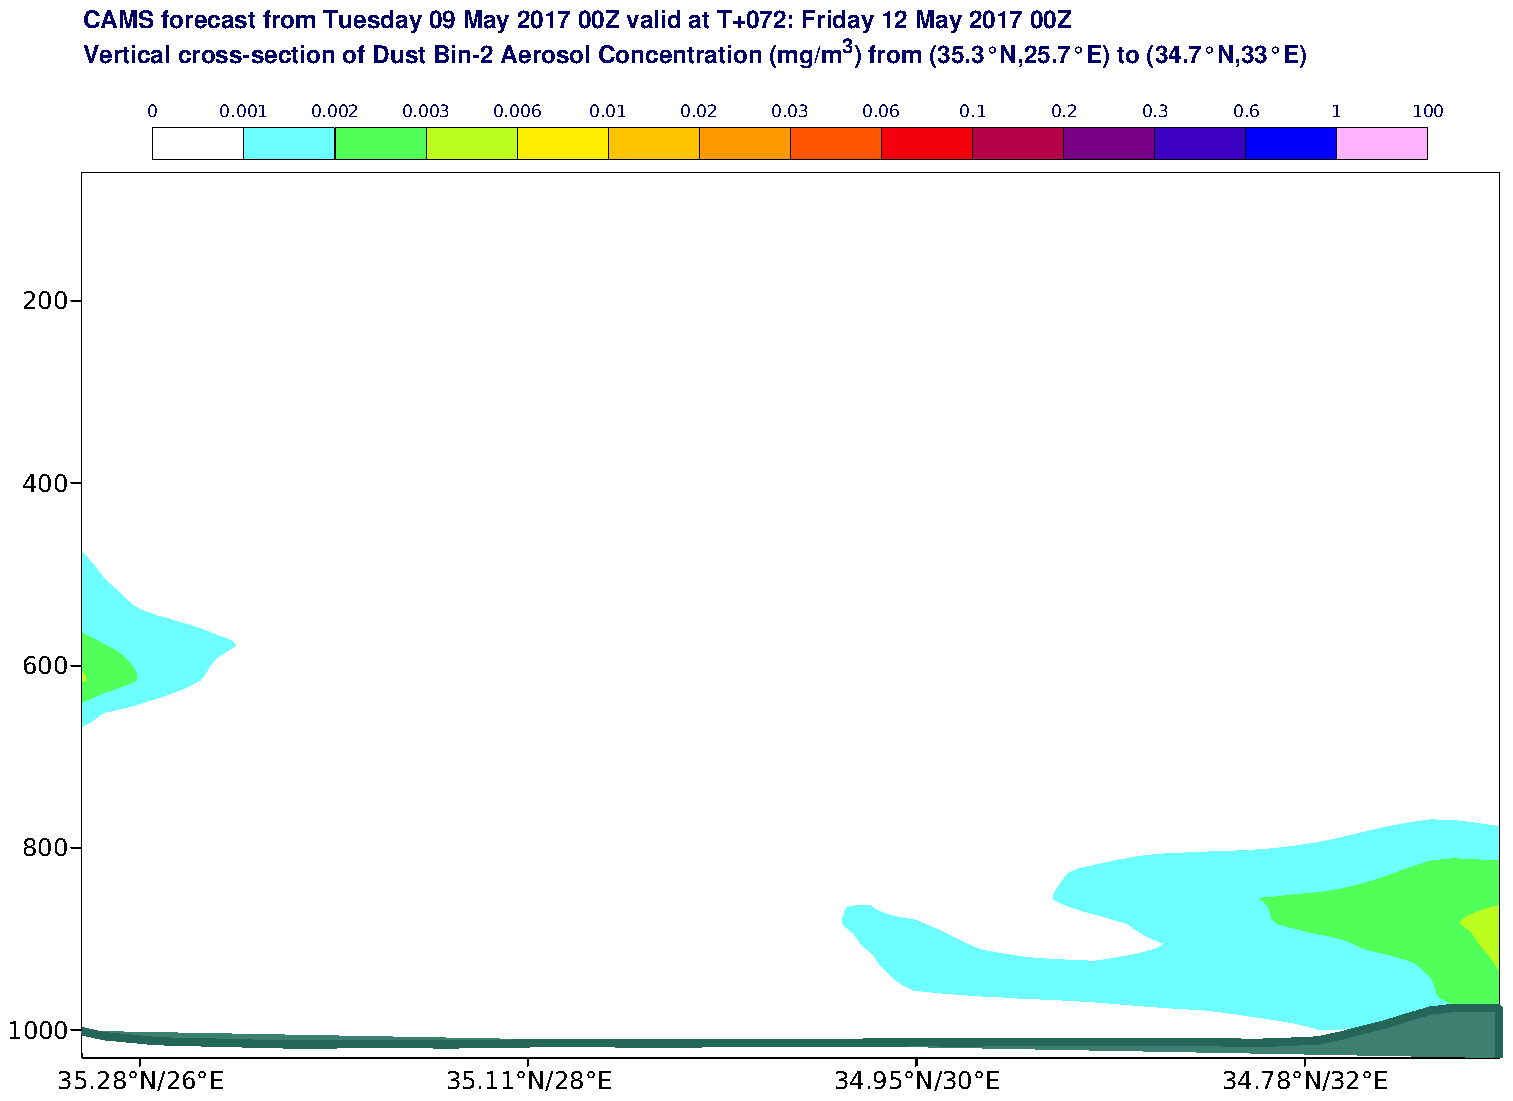 Vertical cross-section of Dust Bin-2 Aerosol Concentration (mg/m3) valid at T72 - 2017-05-12 00:00